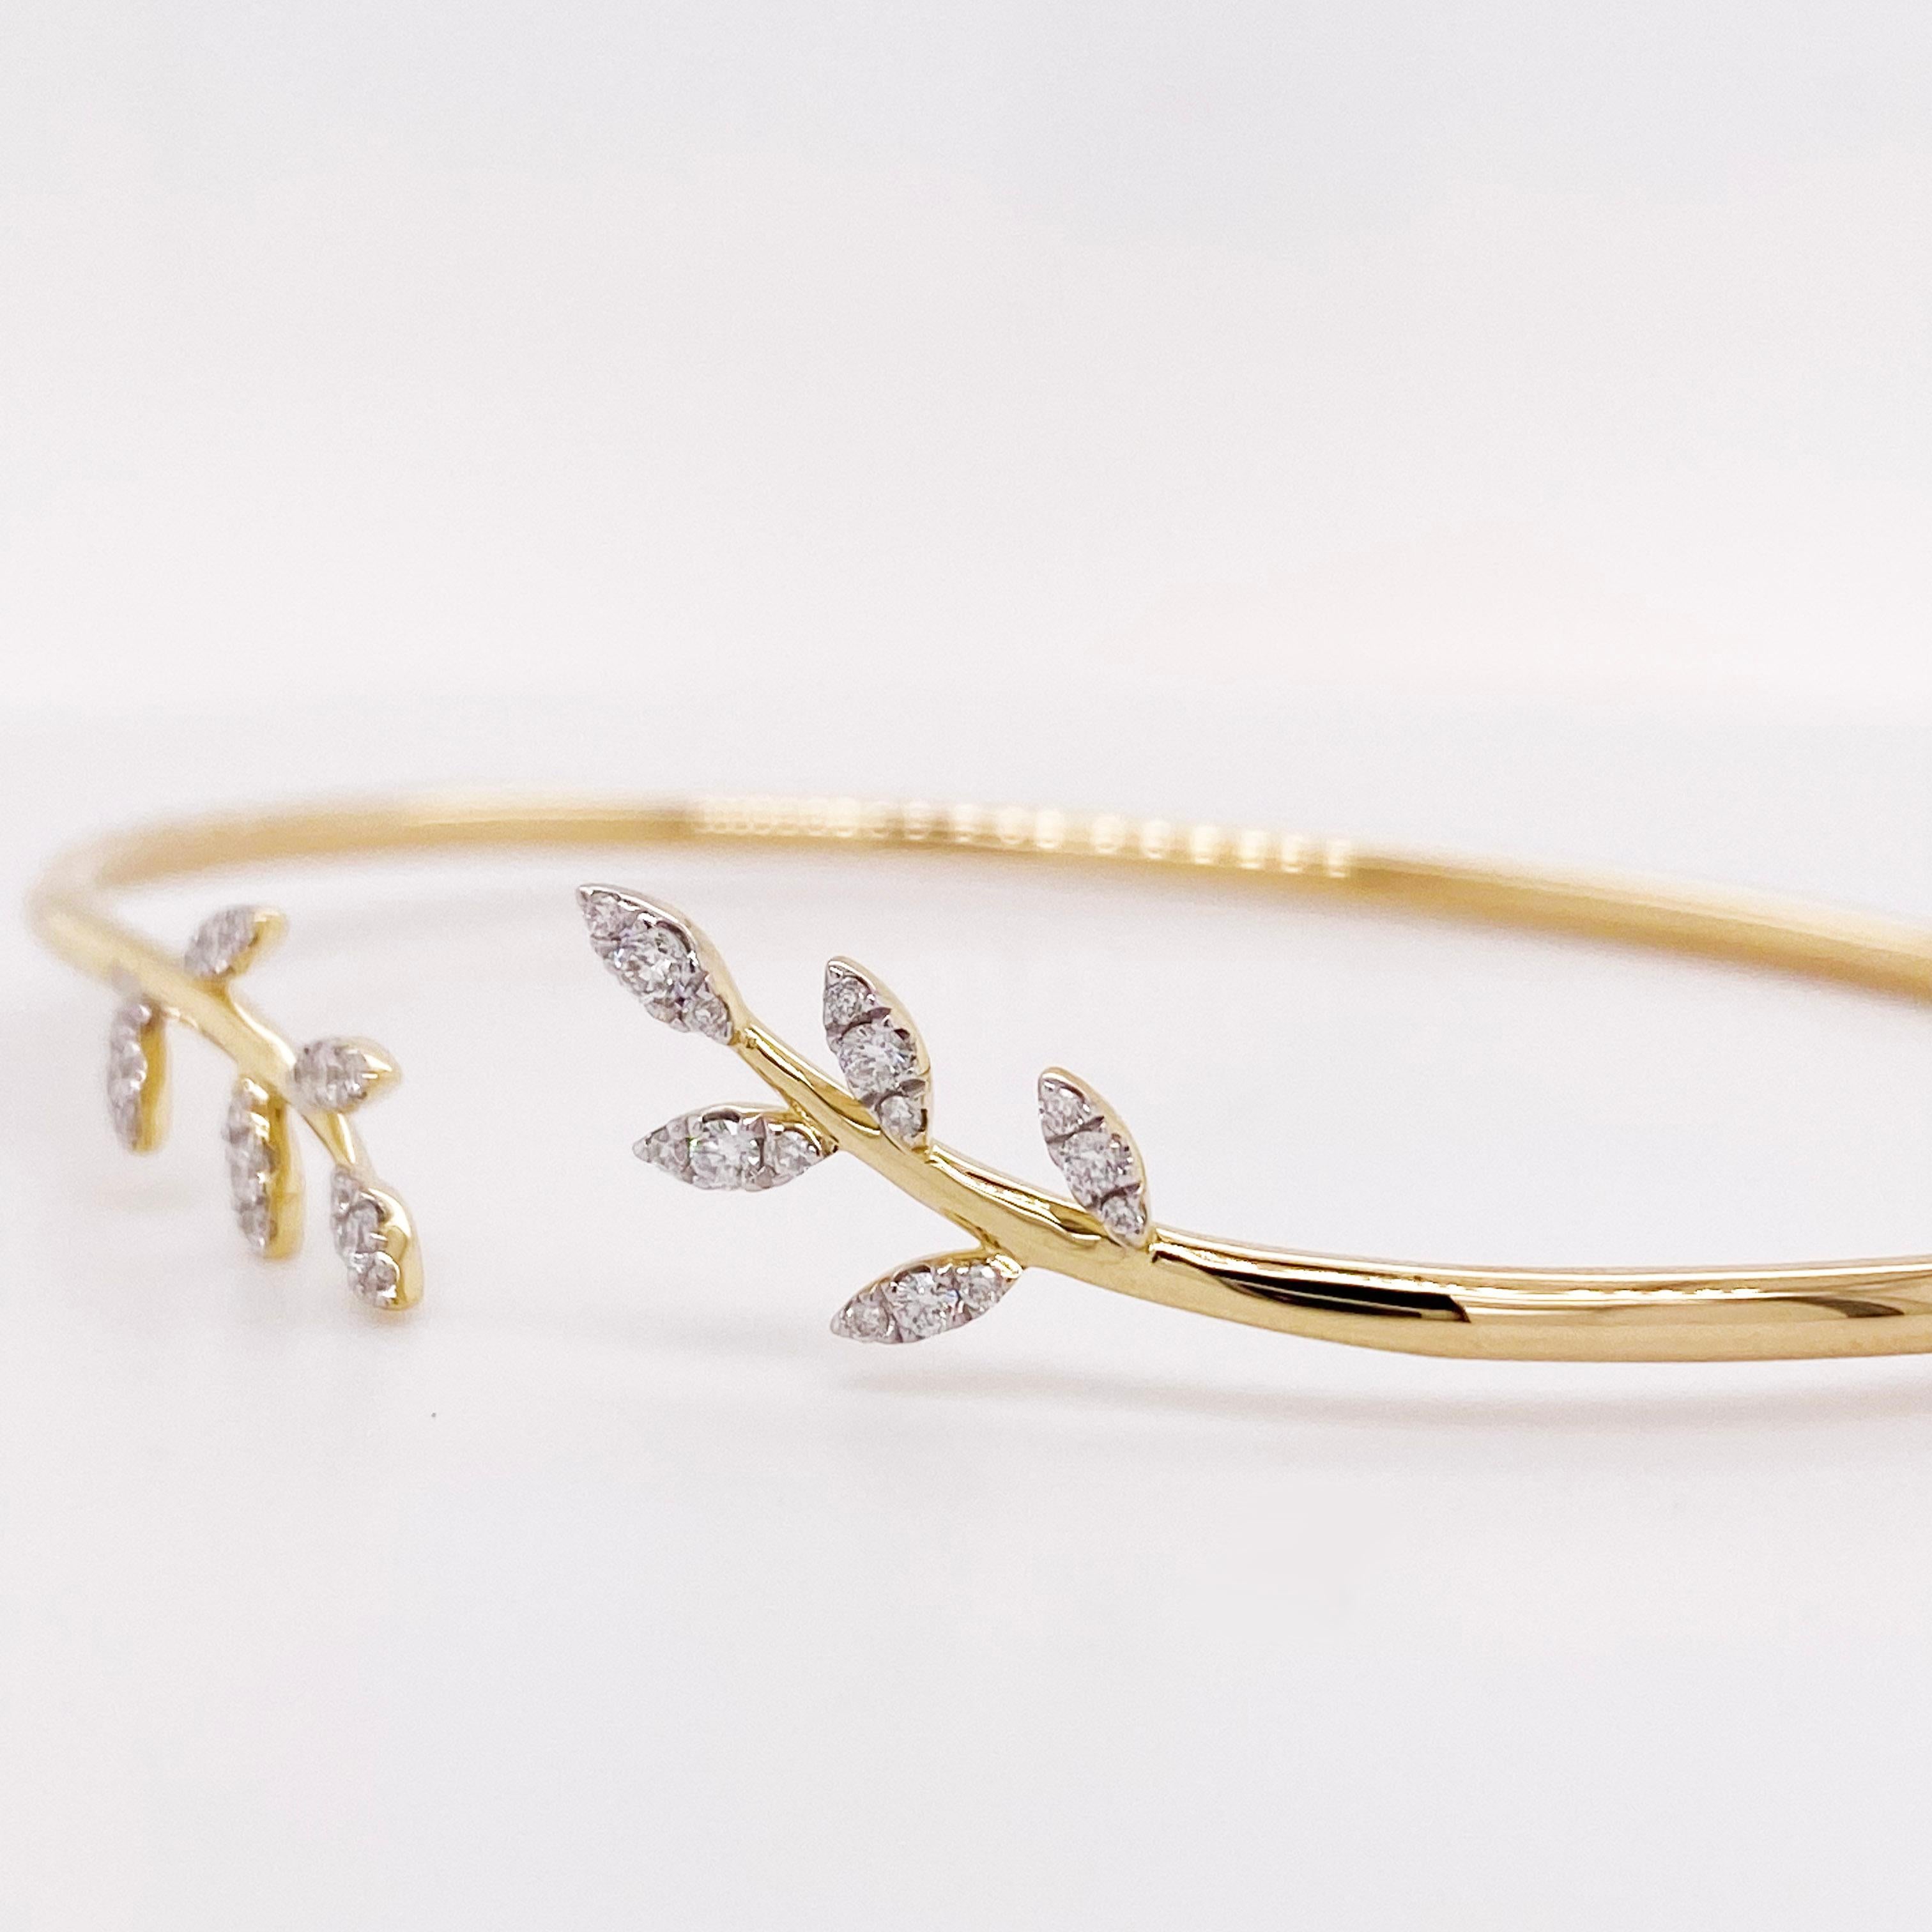 This organic leaf designed bracelet has a diamond on each leaf! The bracelet is flexible and fits most wrists. It is so easy to put on-no clasps or catches to mess with. You just push one side up and the other down and your wrist slides into it